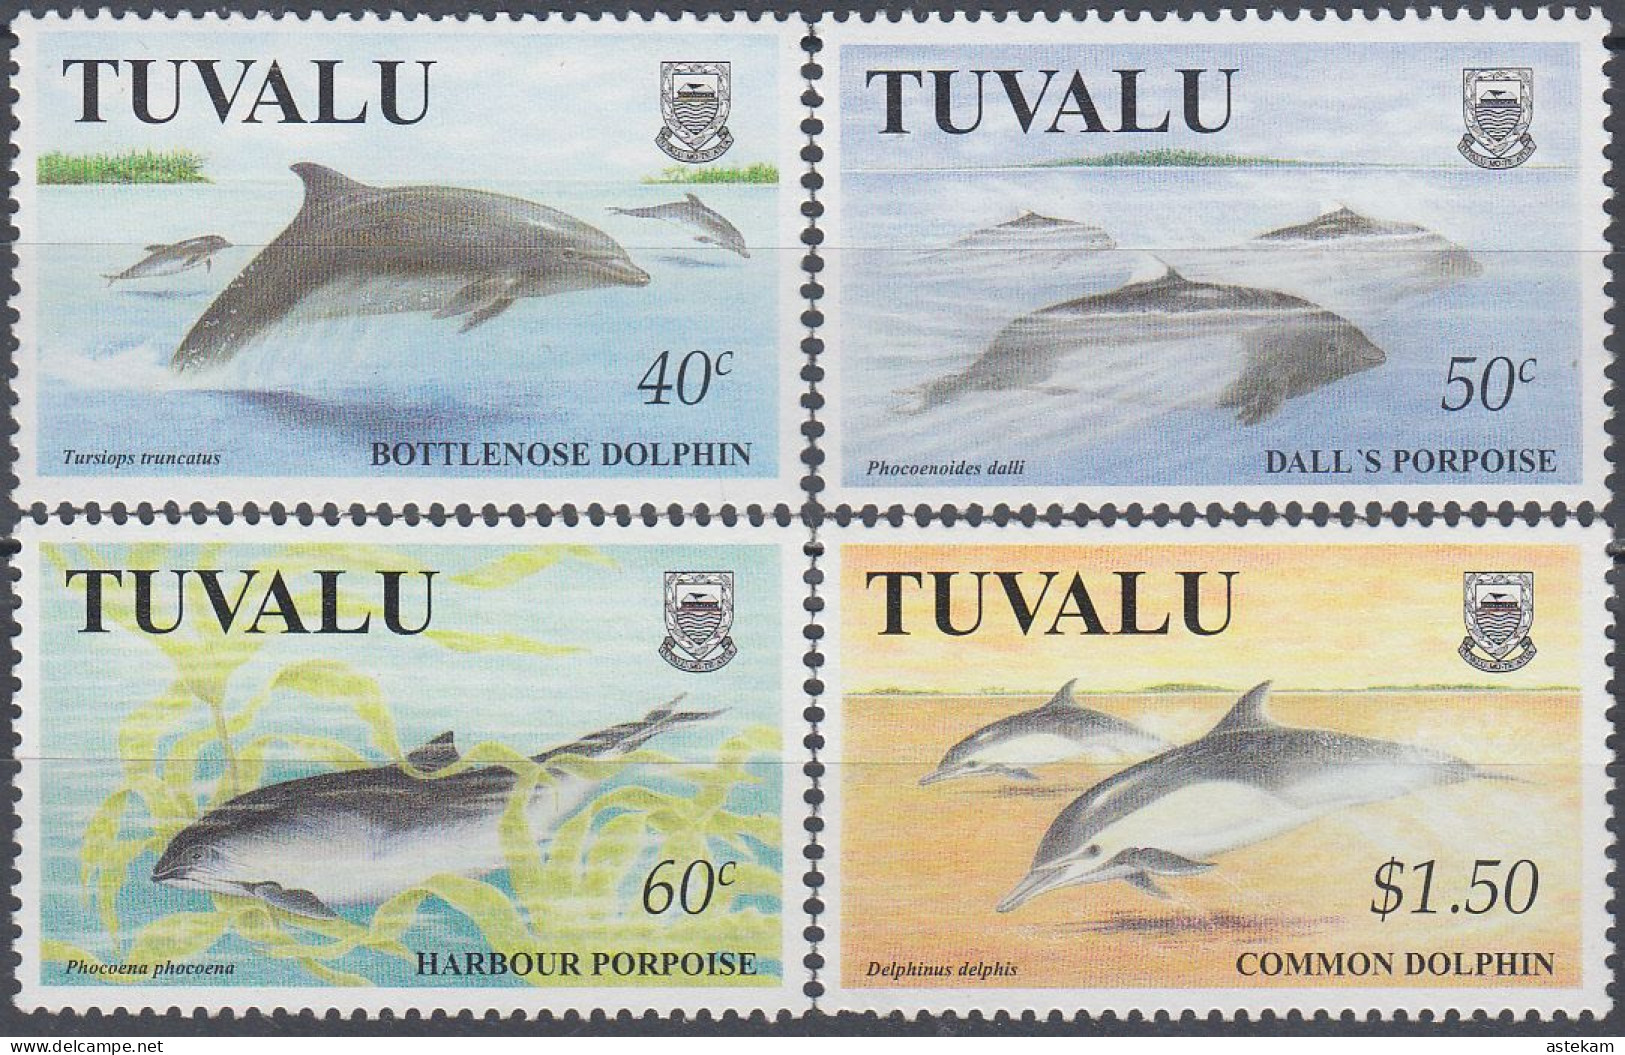 TUVALU 1998, MARINE FAUNA, DOLPHINS, COMPLETE MNH SERIES With GOOD QUALITY, *** - Tuvalu (fr. Elliceinseln)